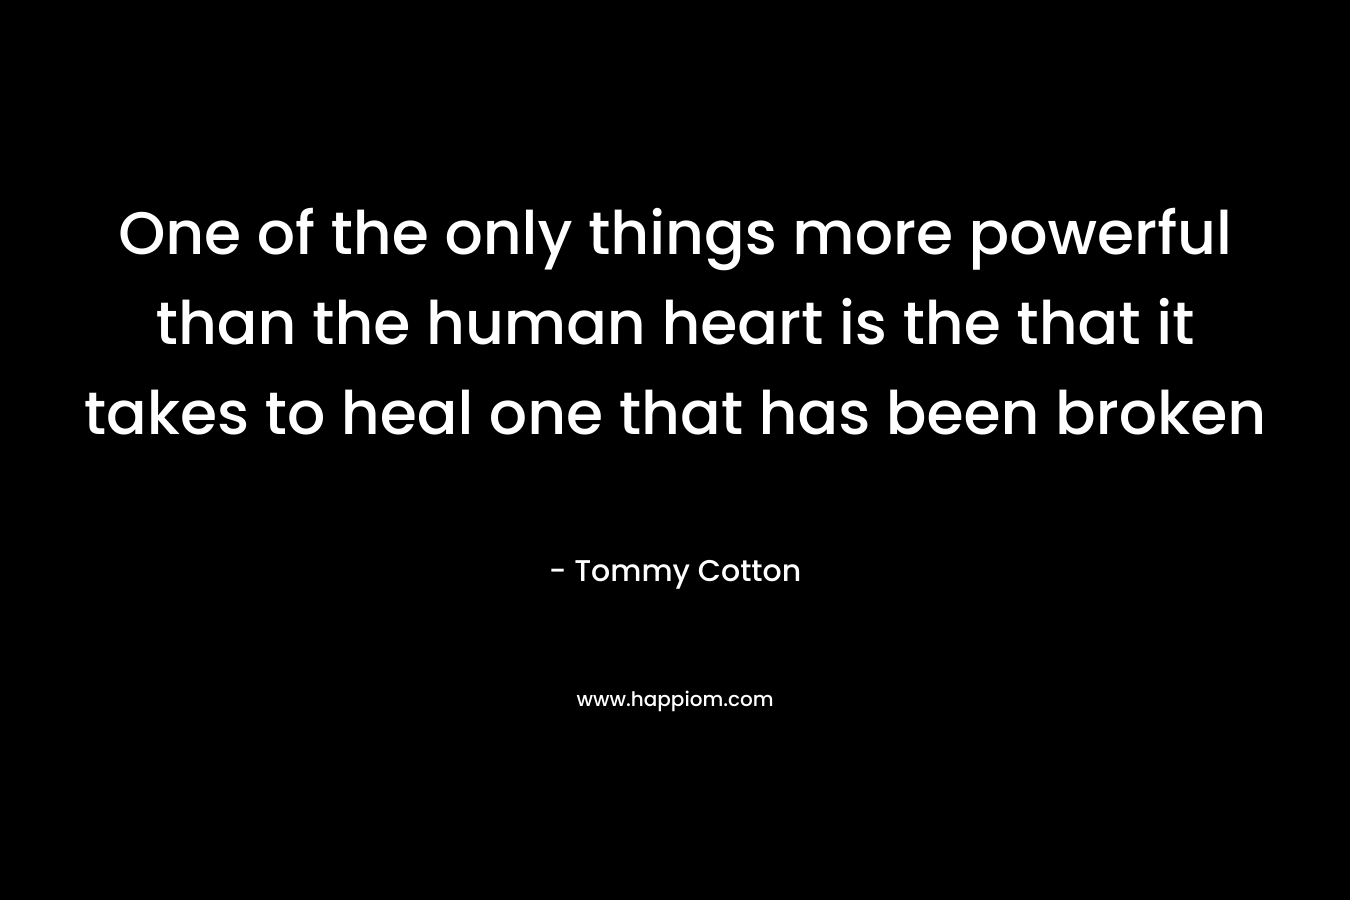 One of the only things more powerful than the human heart is the that it takes to heal one that has been broken